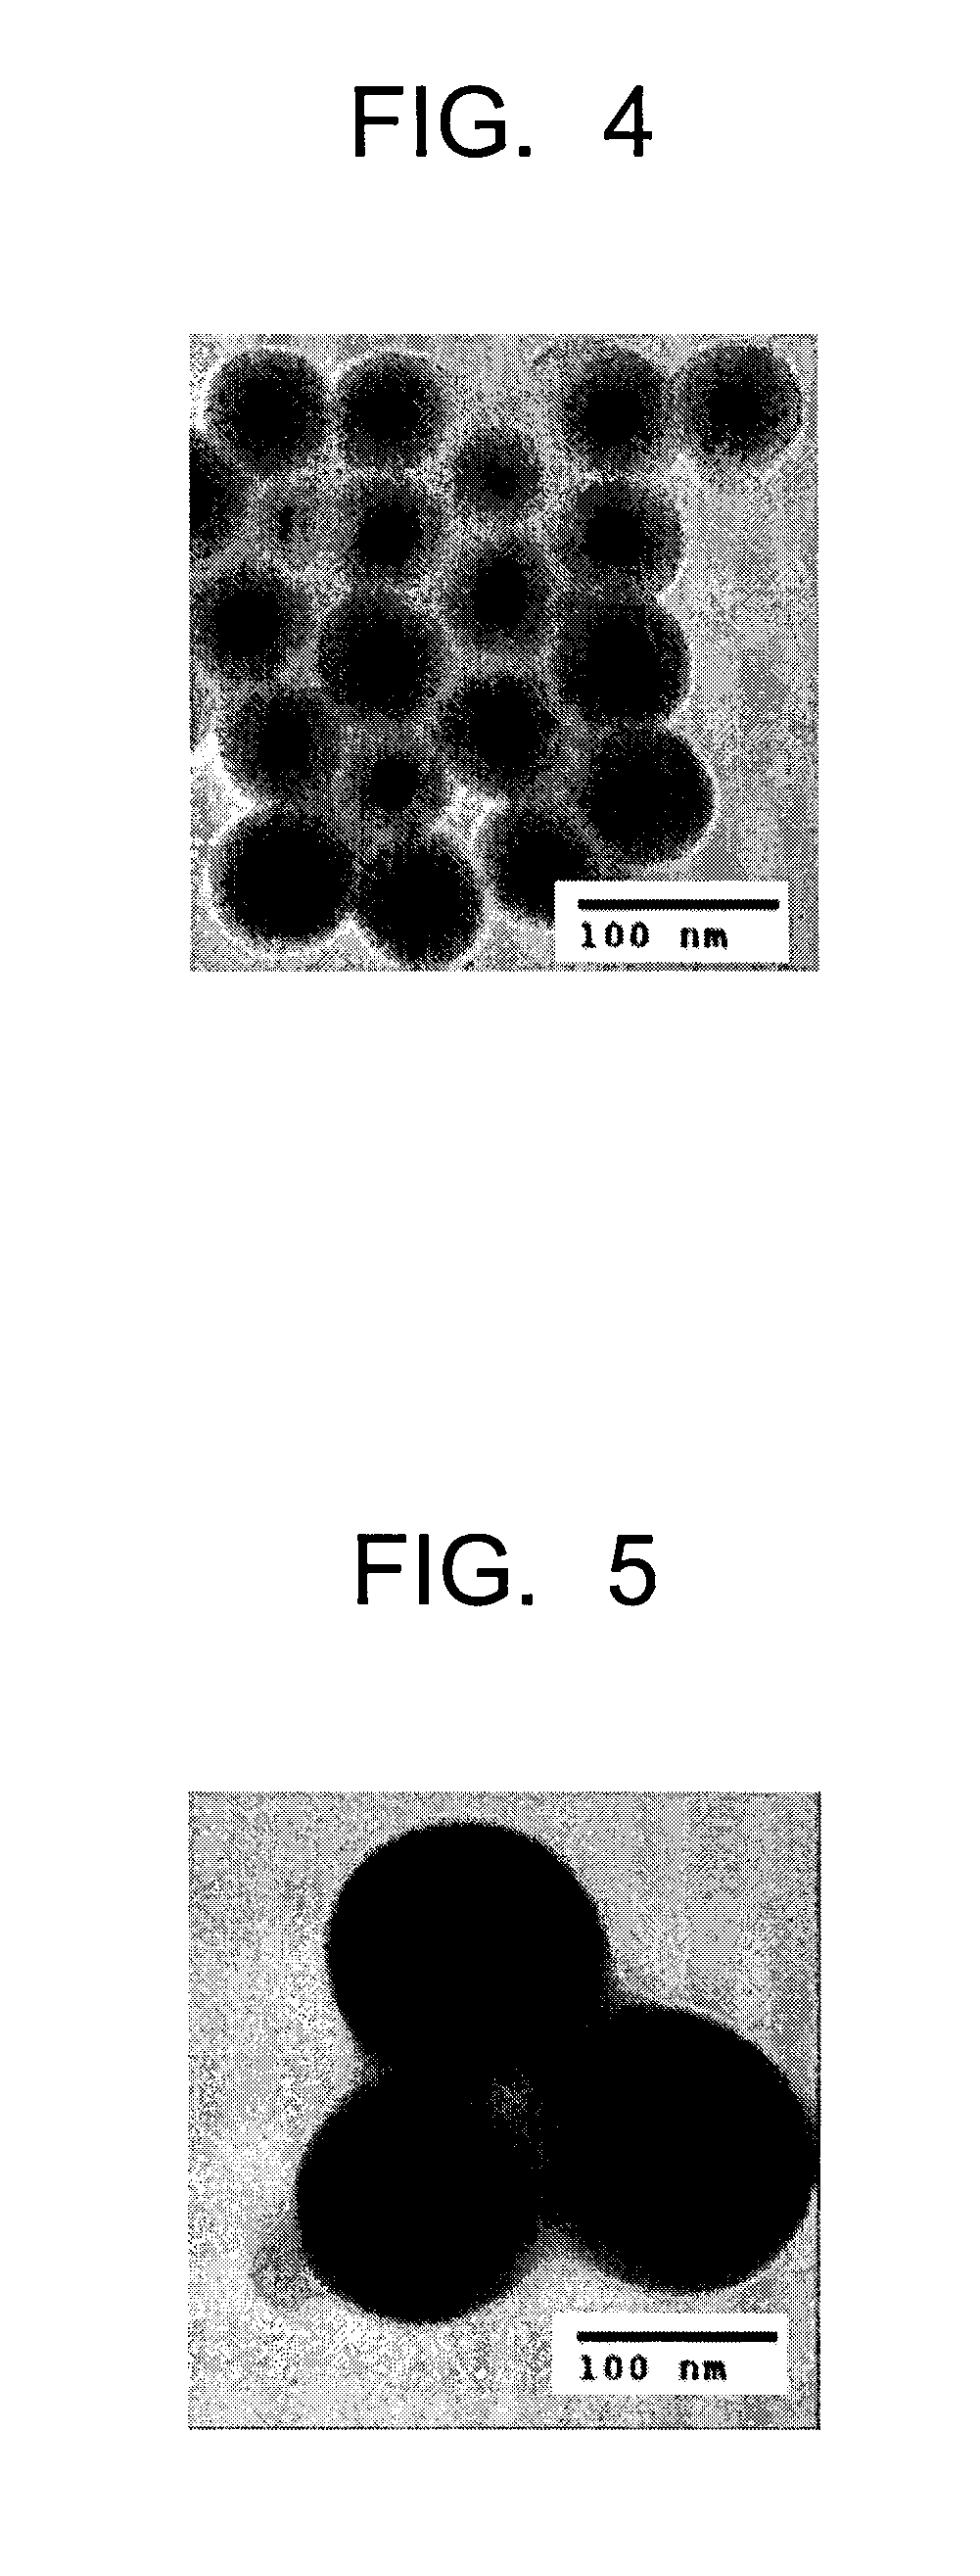 Process for production of surface-coated inorganic particles